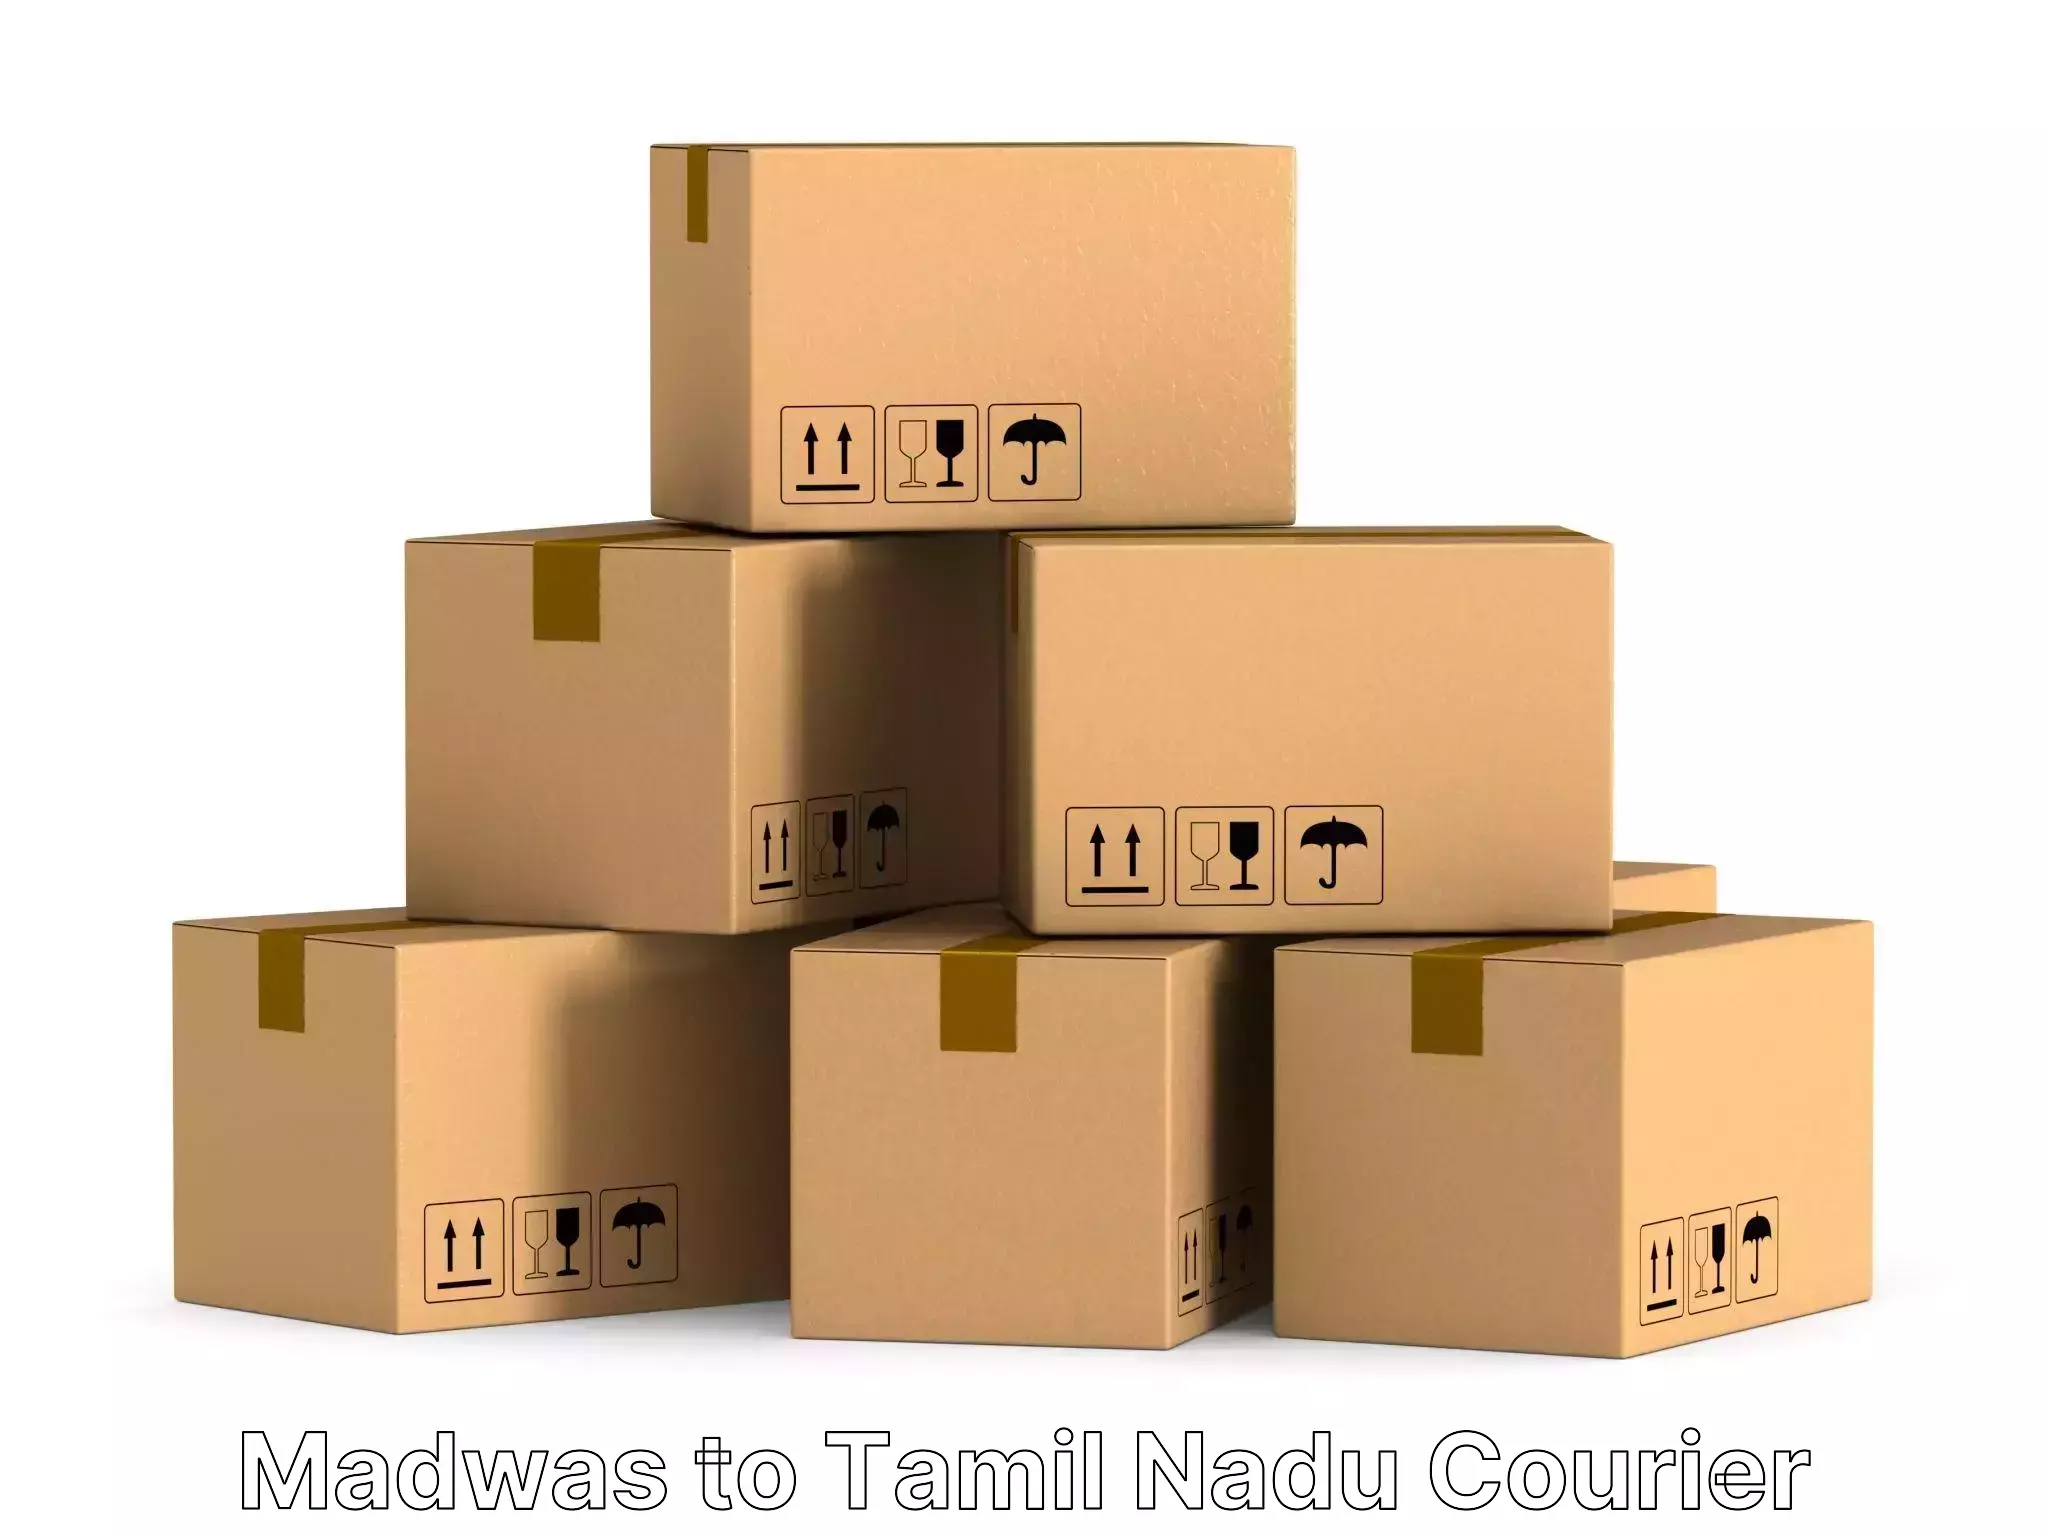 Furniture relocation experts Madwas to Mettur